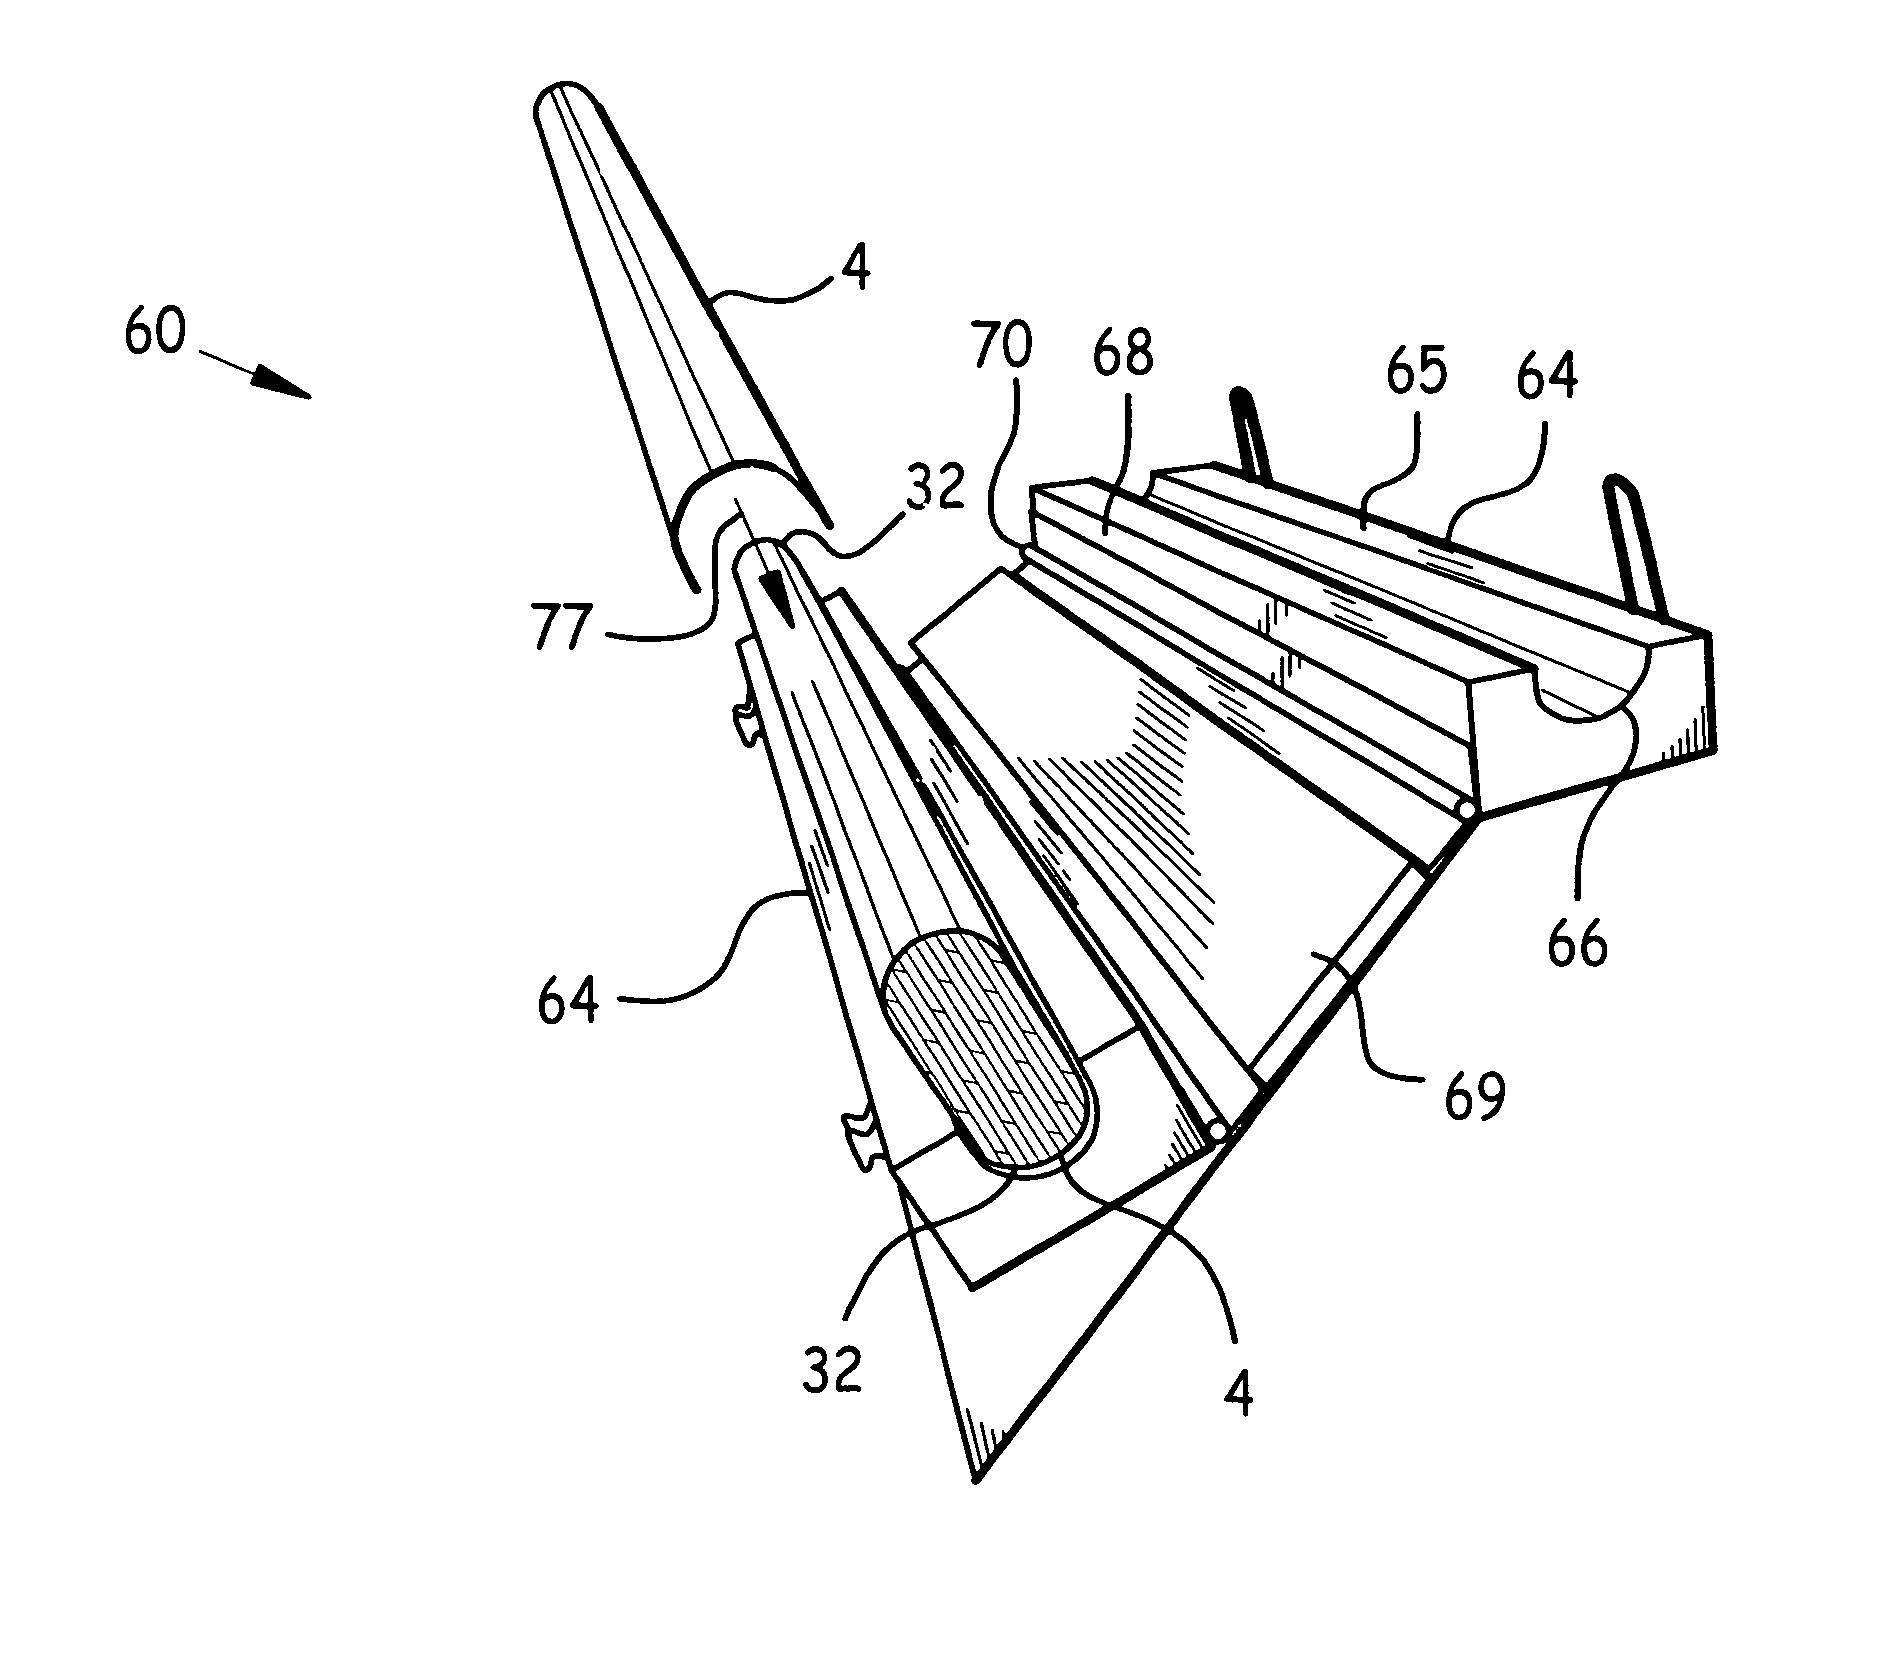 Apparatus and method to manufacture shaped counter top edges for custom counter tops